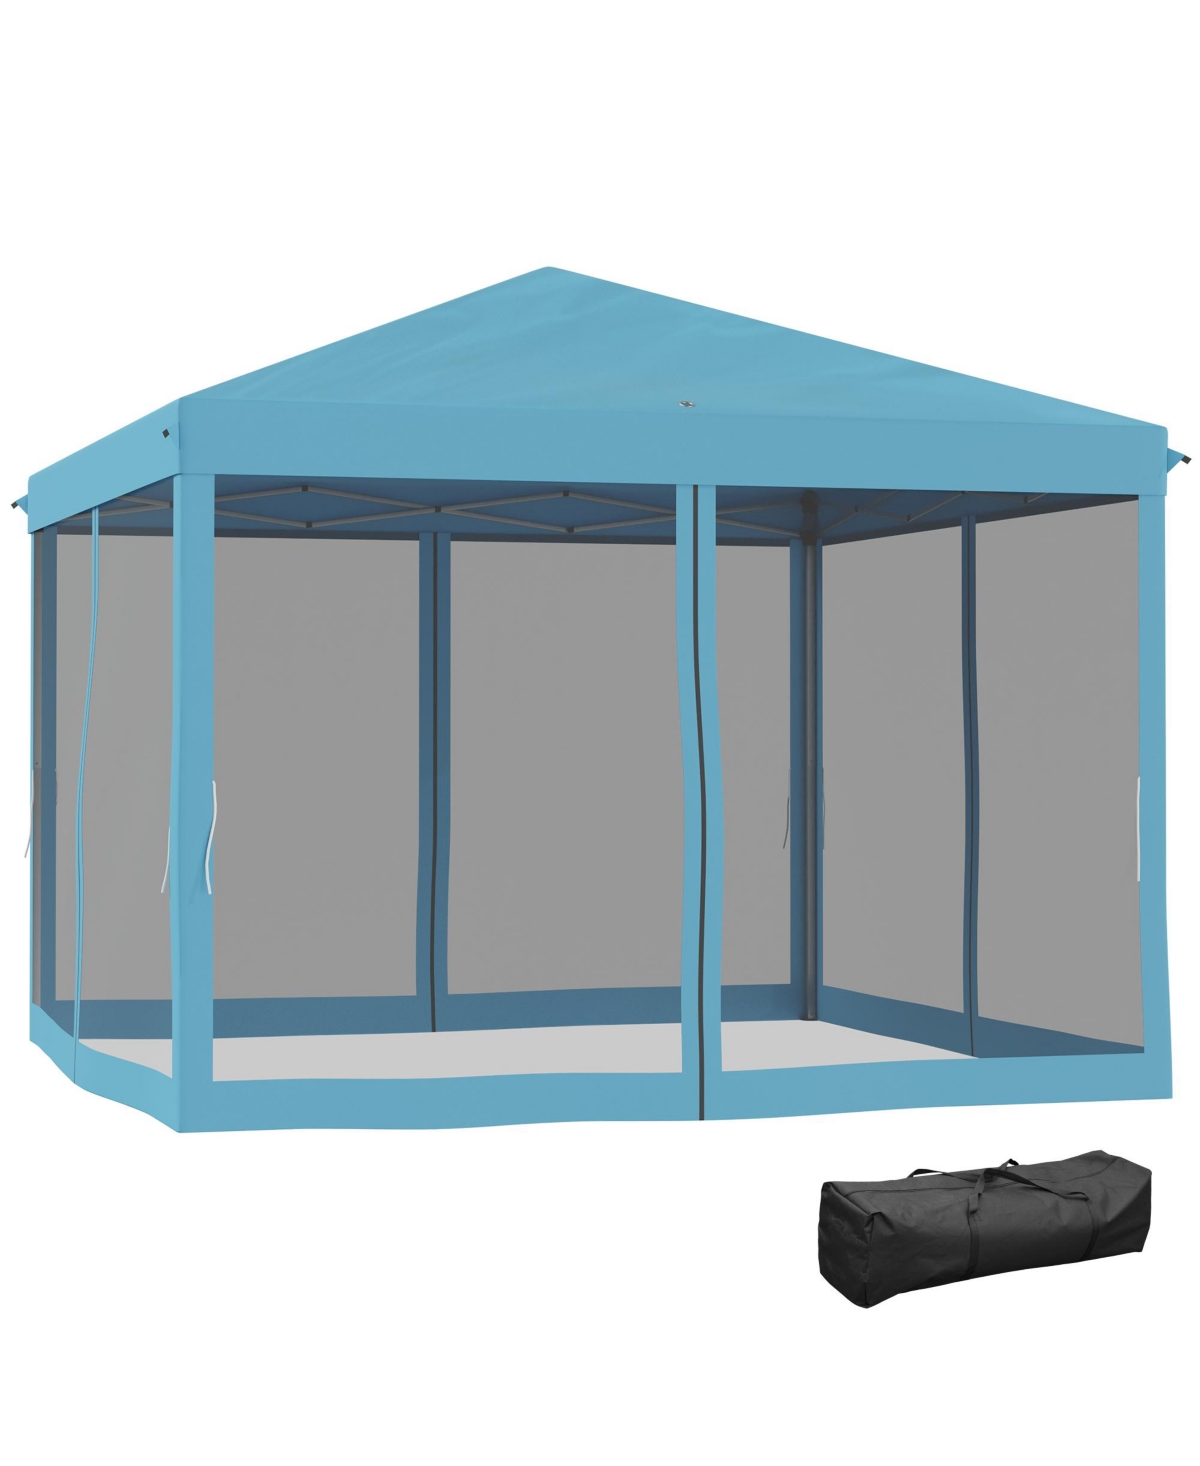 Outdoor 10' x 10' Patio Gazebo Outdoor Pop-Up Canopy with Sidewalls, Instant Setup, 4 Mesh Walls for Party, Events, Backyard, Lawn, Light Blu